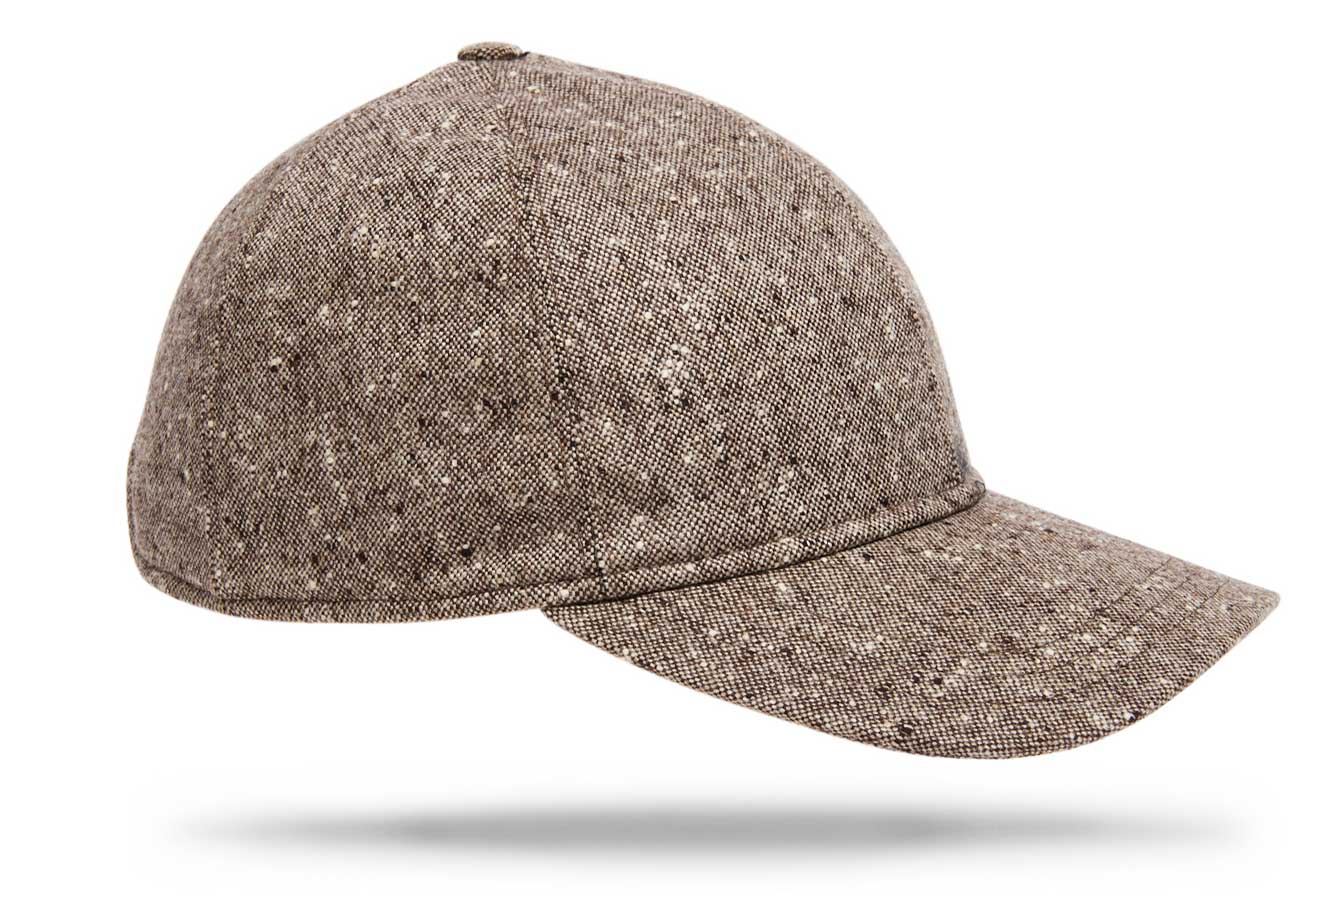 
Design
A refined and upgraded version of a timeless baseball cap for a modernized sportswear aesthetic. Crafted from 100% wool, this elevated yet casual cap is constructed from six panels with a curved brim. The perfect casual-luxe accessory for any ensemble. 
Material
100% wool. 
Specifications
100% wool fully lined.Handmade in Italy for Worth & Worth.